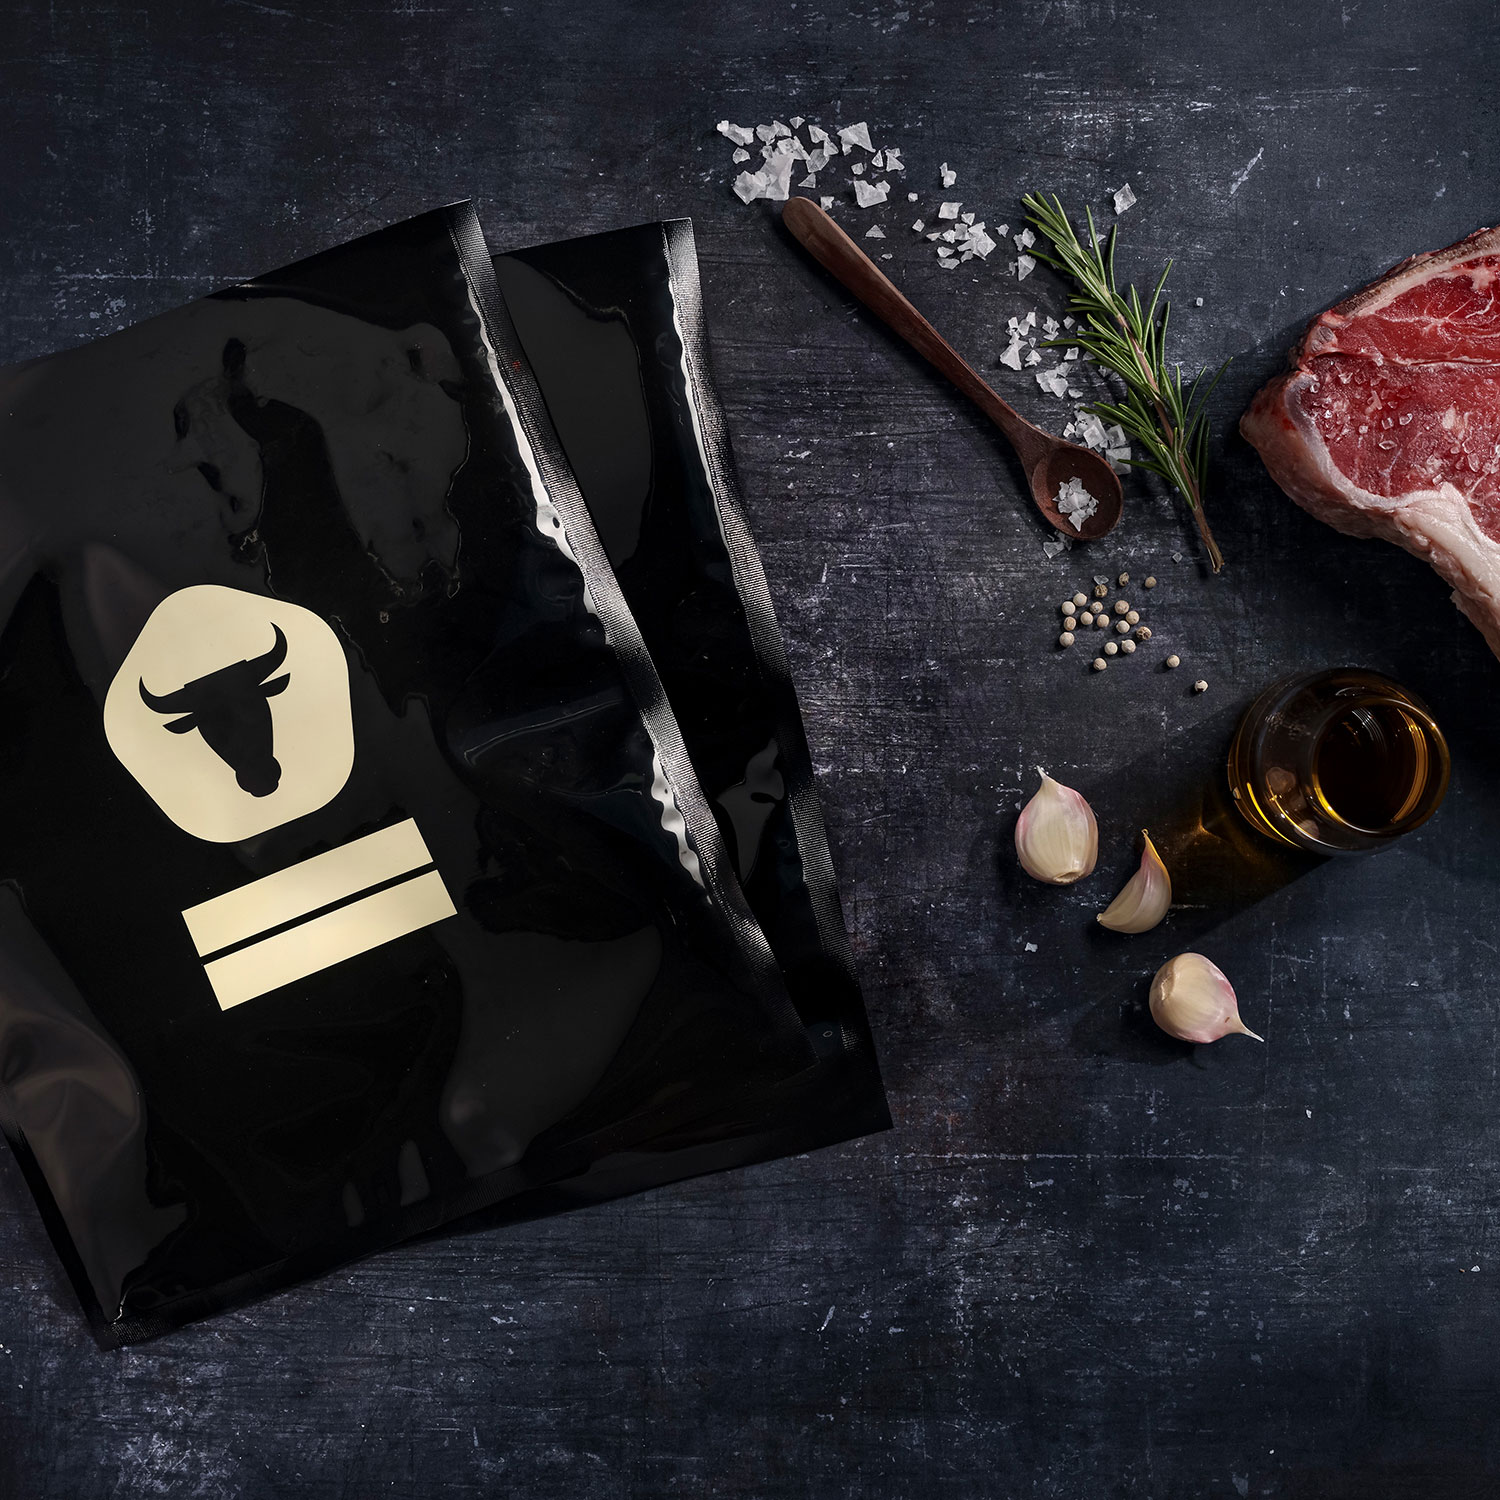 Black vacuum bags with dry ager logo and t-bone steak